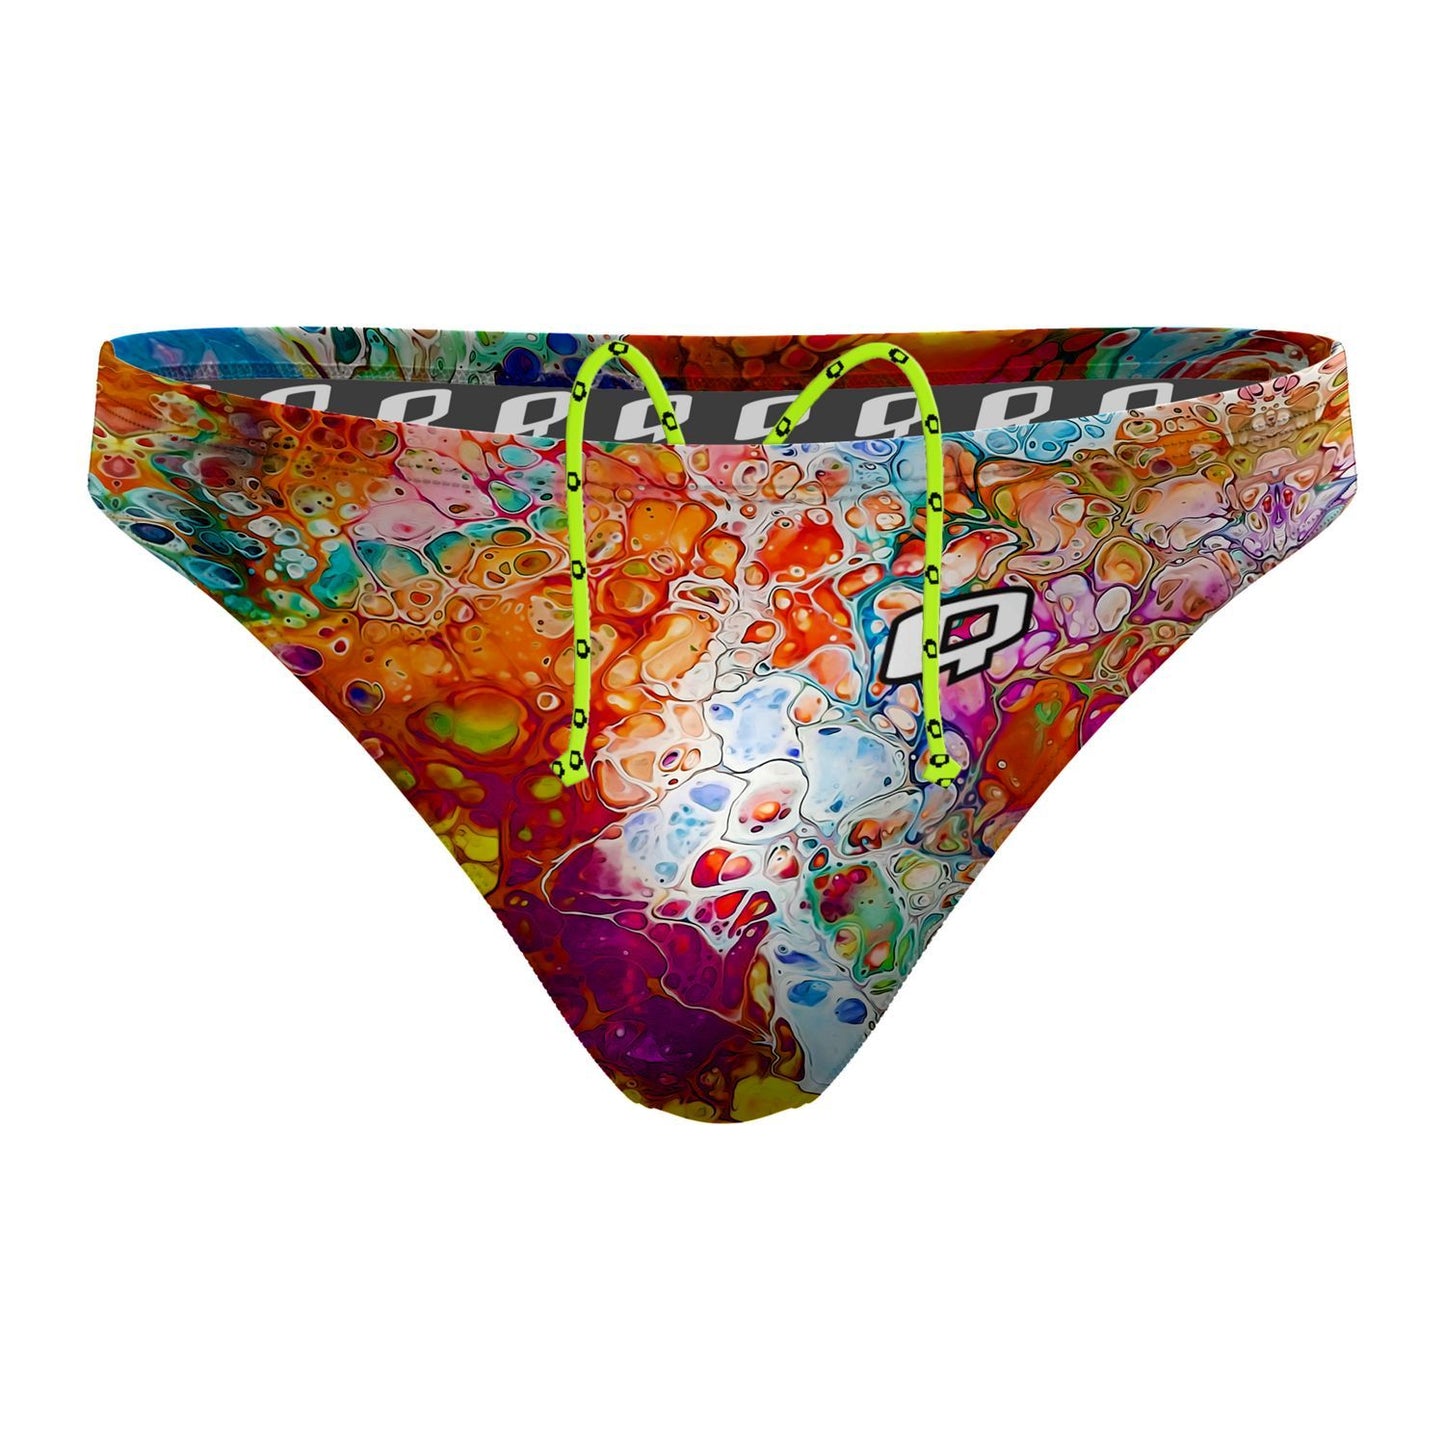 Colors of the Sea Waterpolo Brief